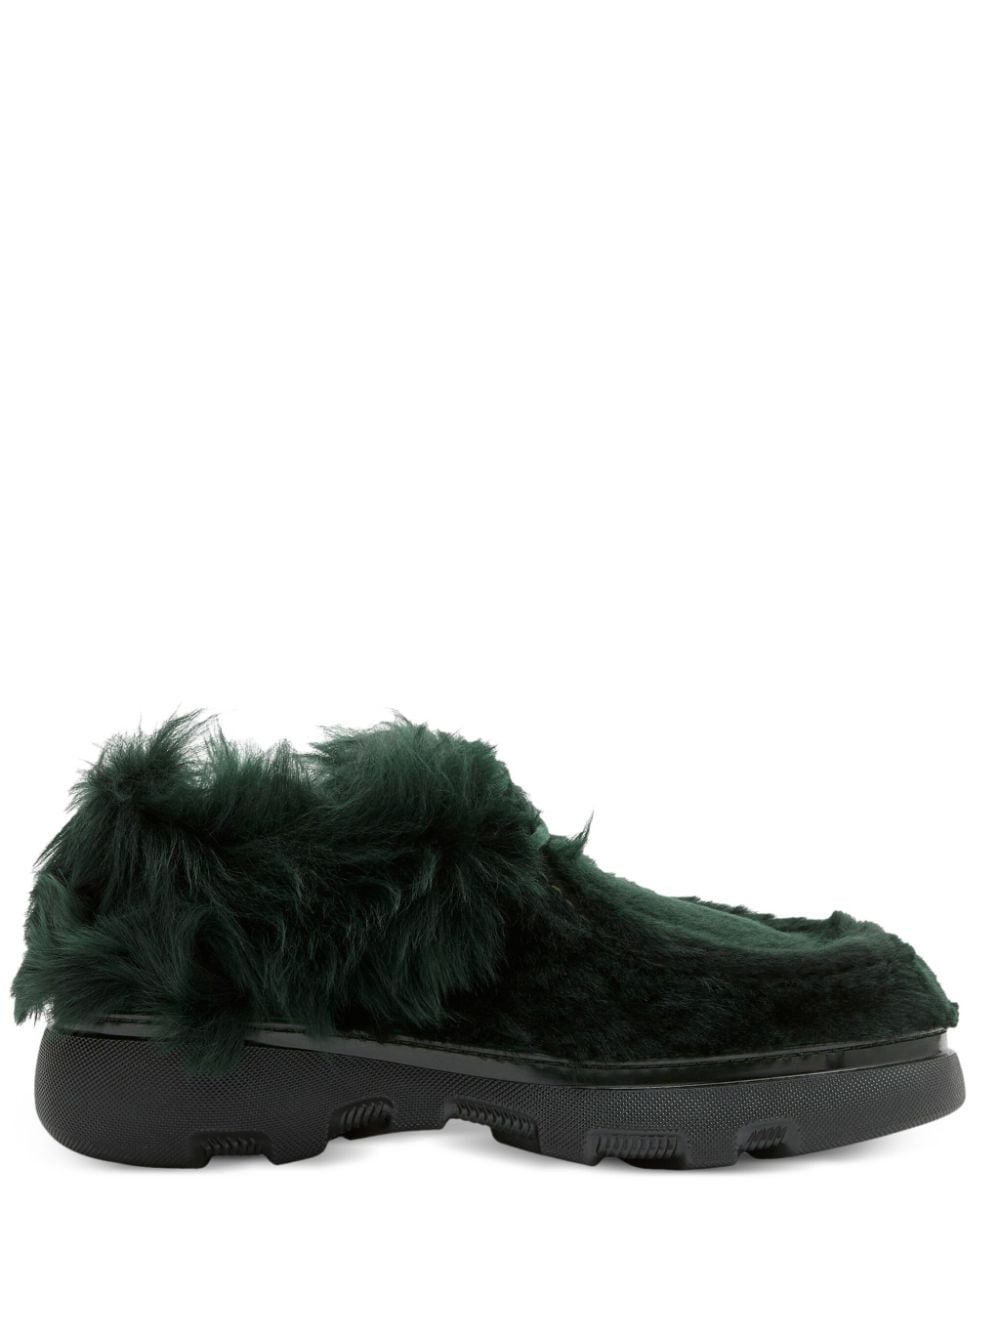 Burberry shearling creeper shoes - Green von Burberry